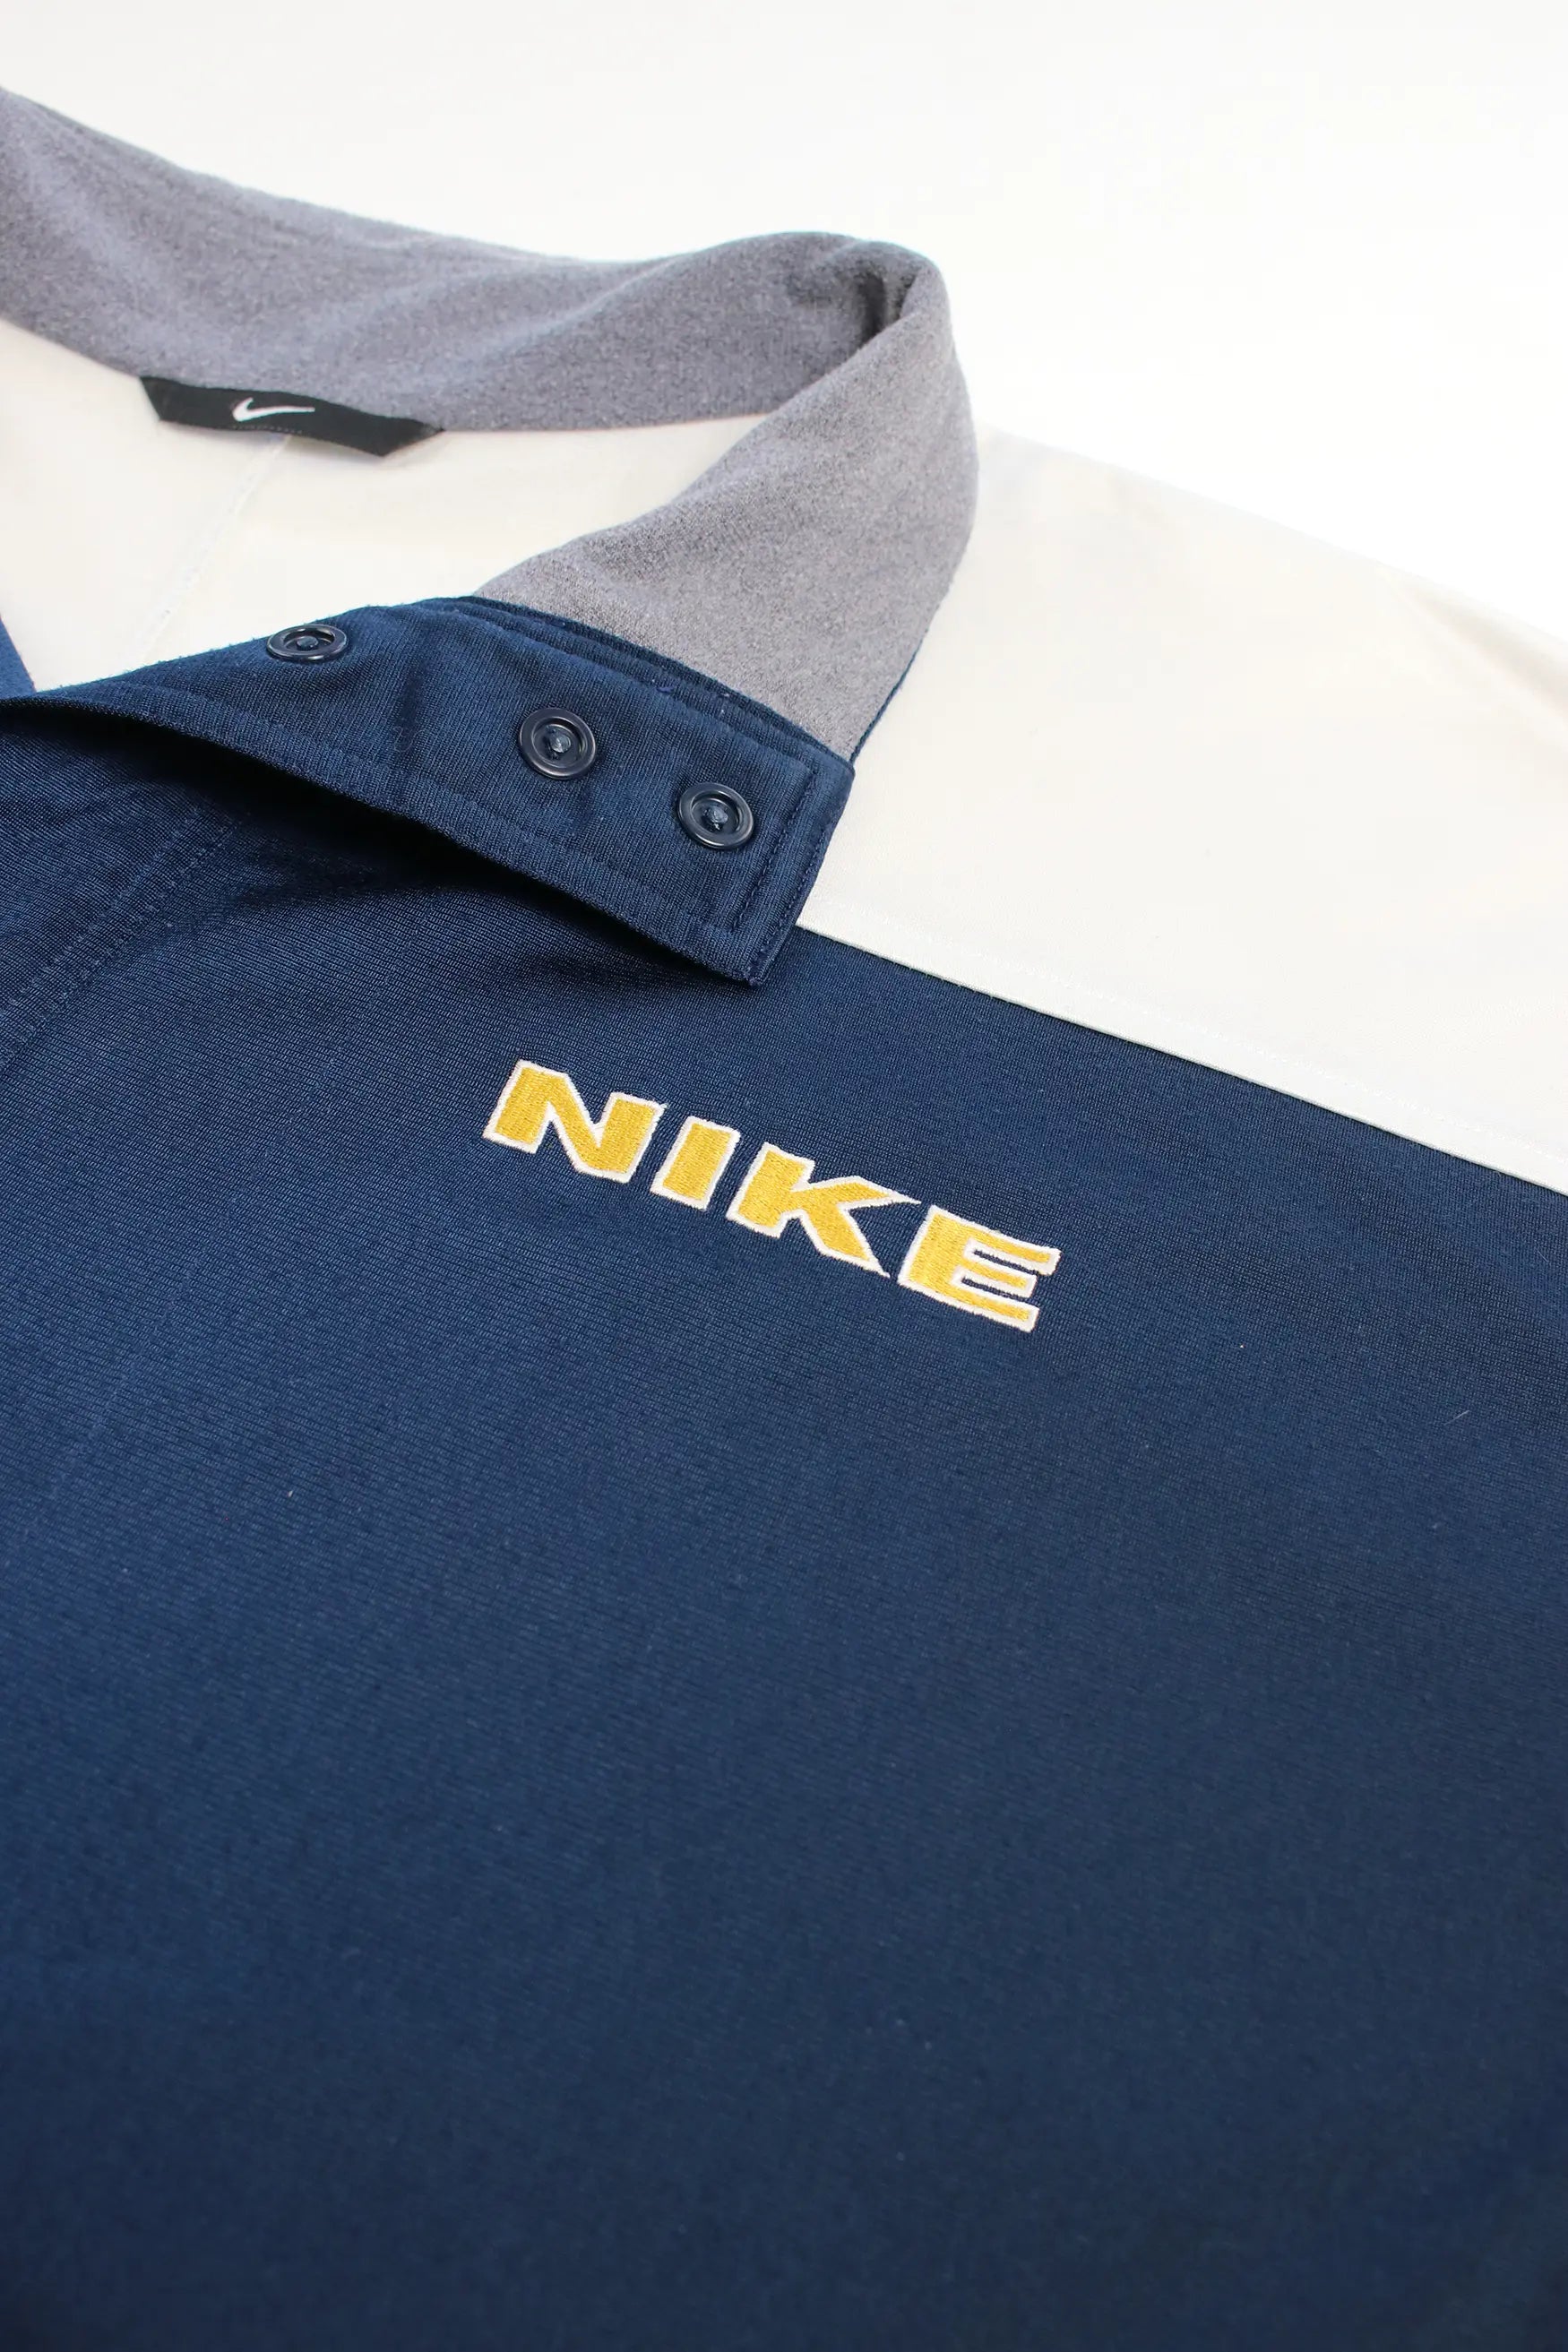 Nike Button-Up Trackjacket